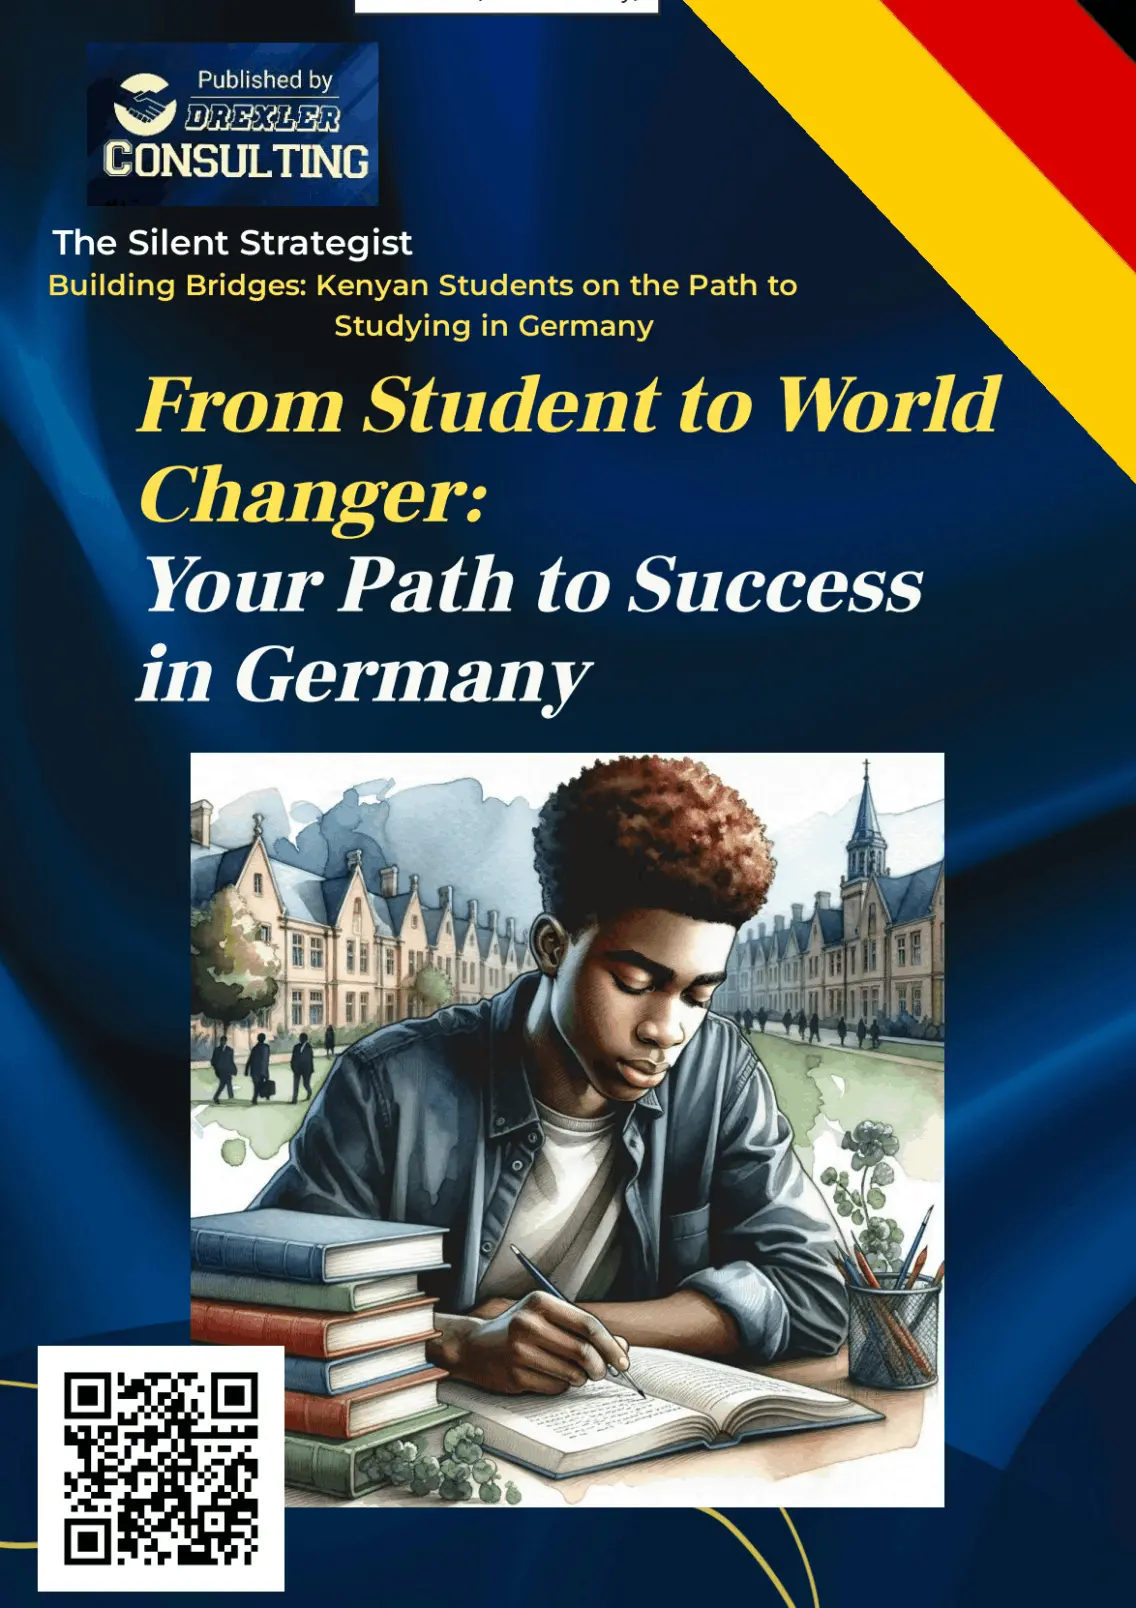 Drexler consulting, lifechanger, from student to worldchanger, a black man study somerwhere in europe